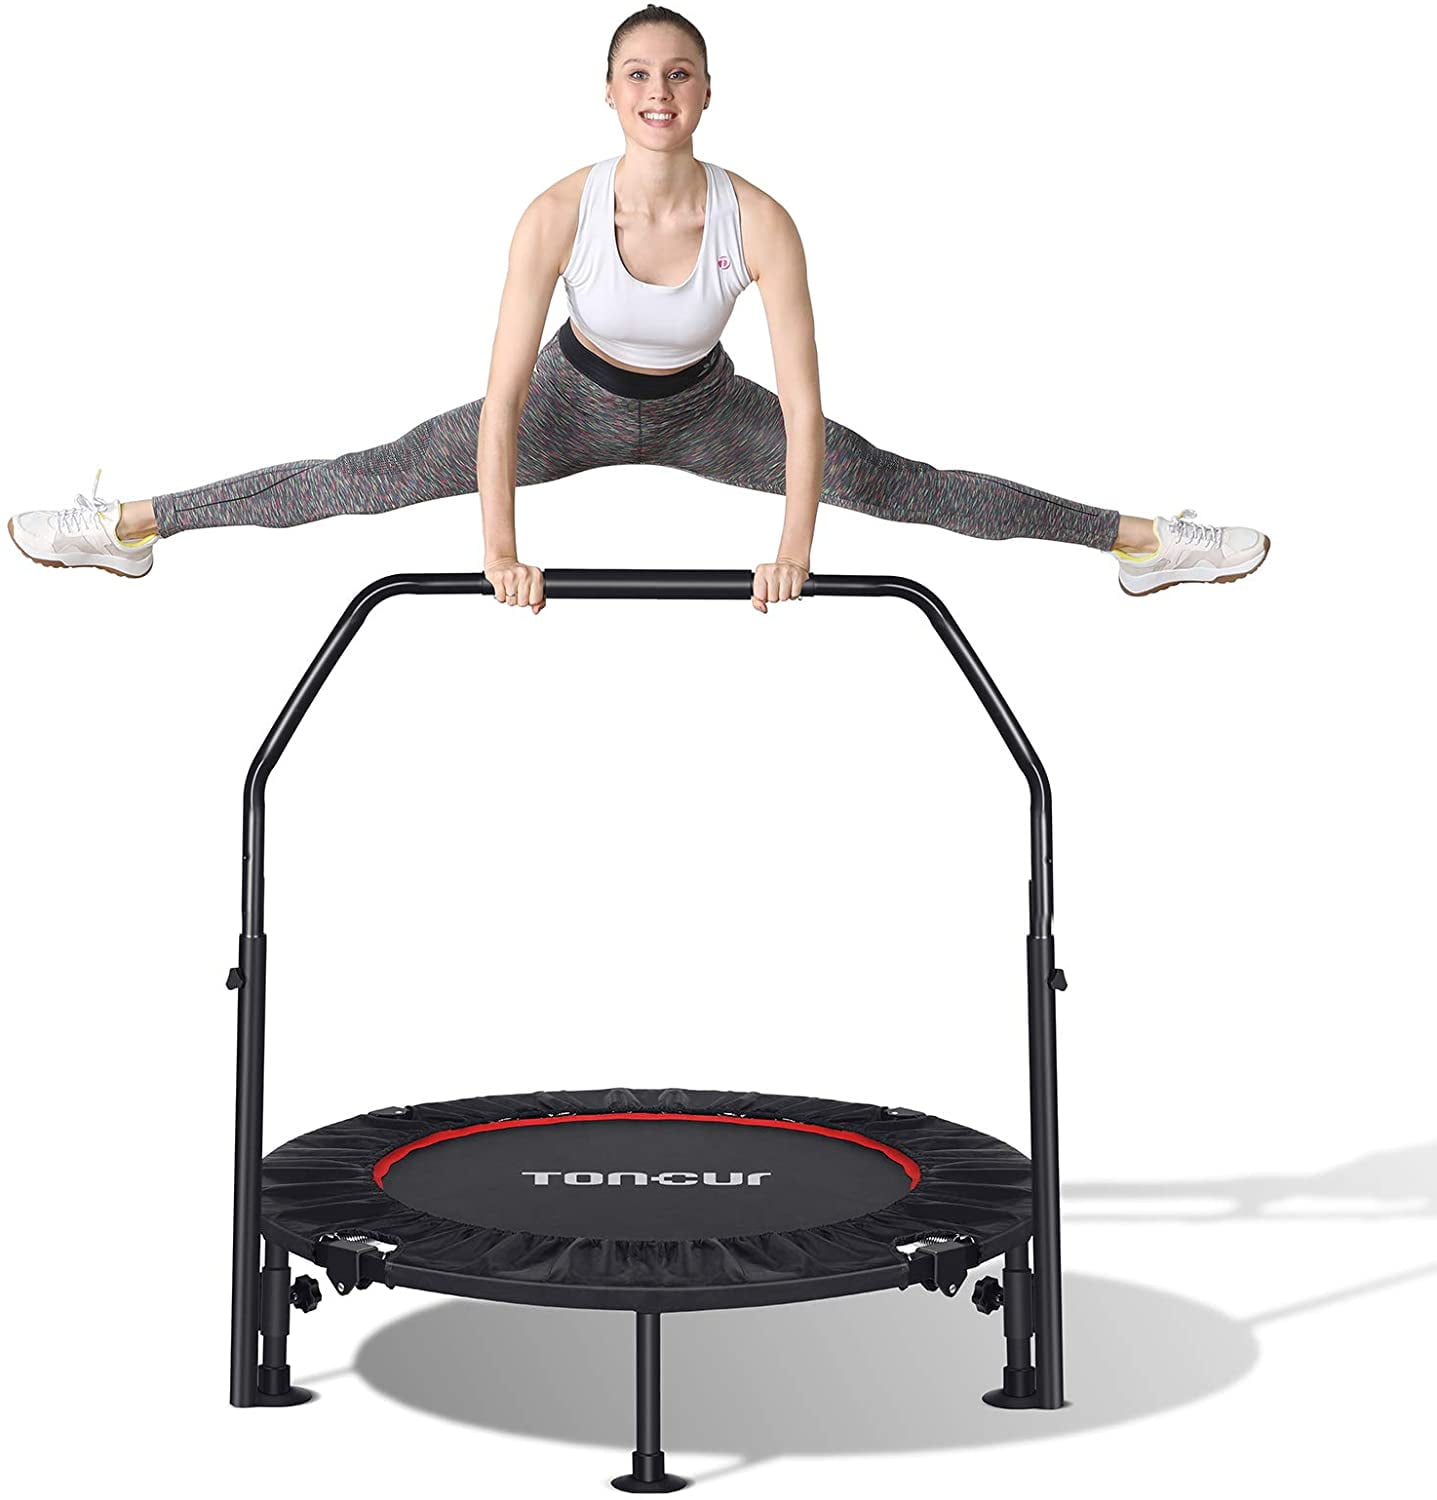 Foldable Exercise Bungee Rebounder with 5 Levels Adjustable Foam Handle for Indoor/Outdoor Max Load 330lbs 40 Mini Fitness Tramp0line for Adults 6 Suction Cups Included 